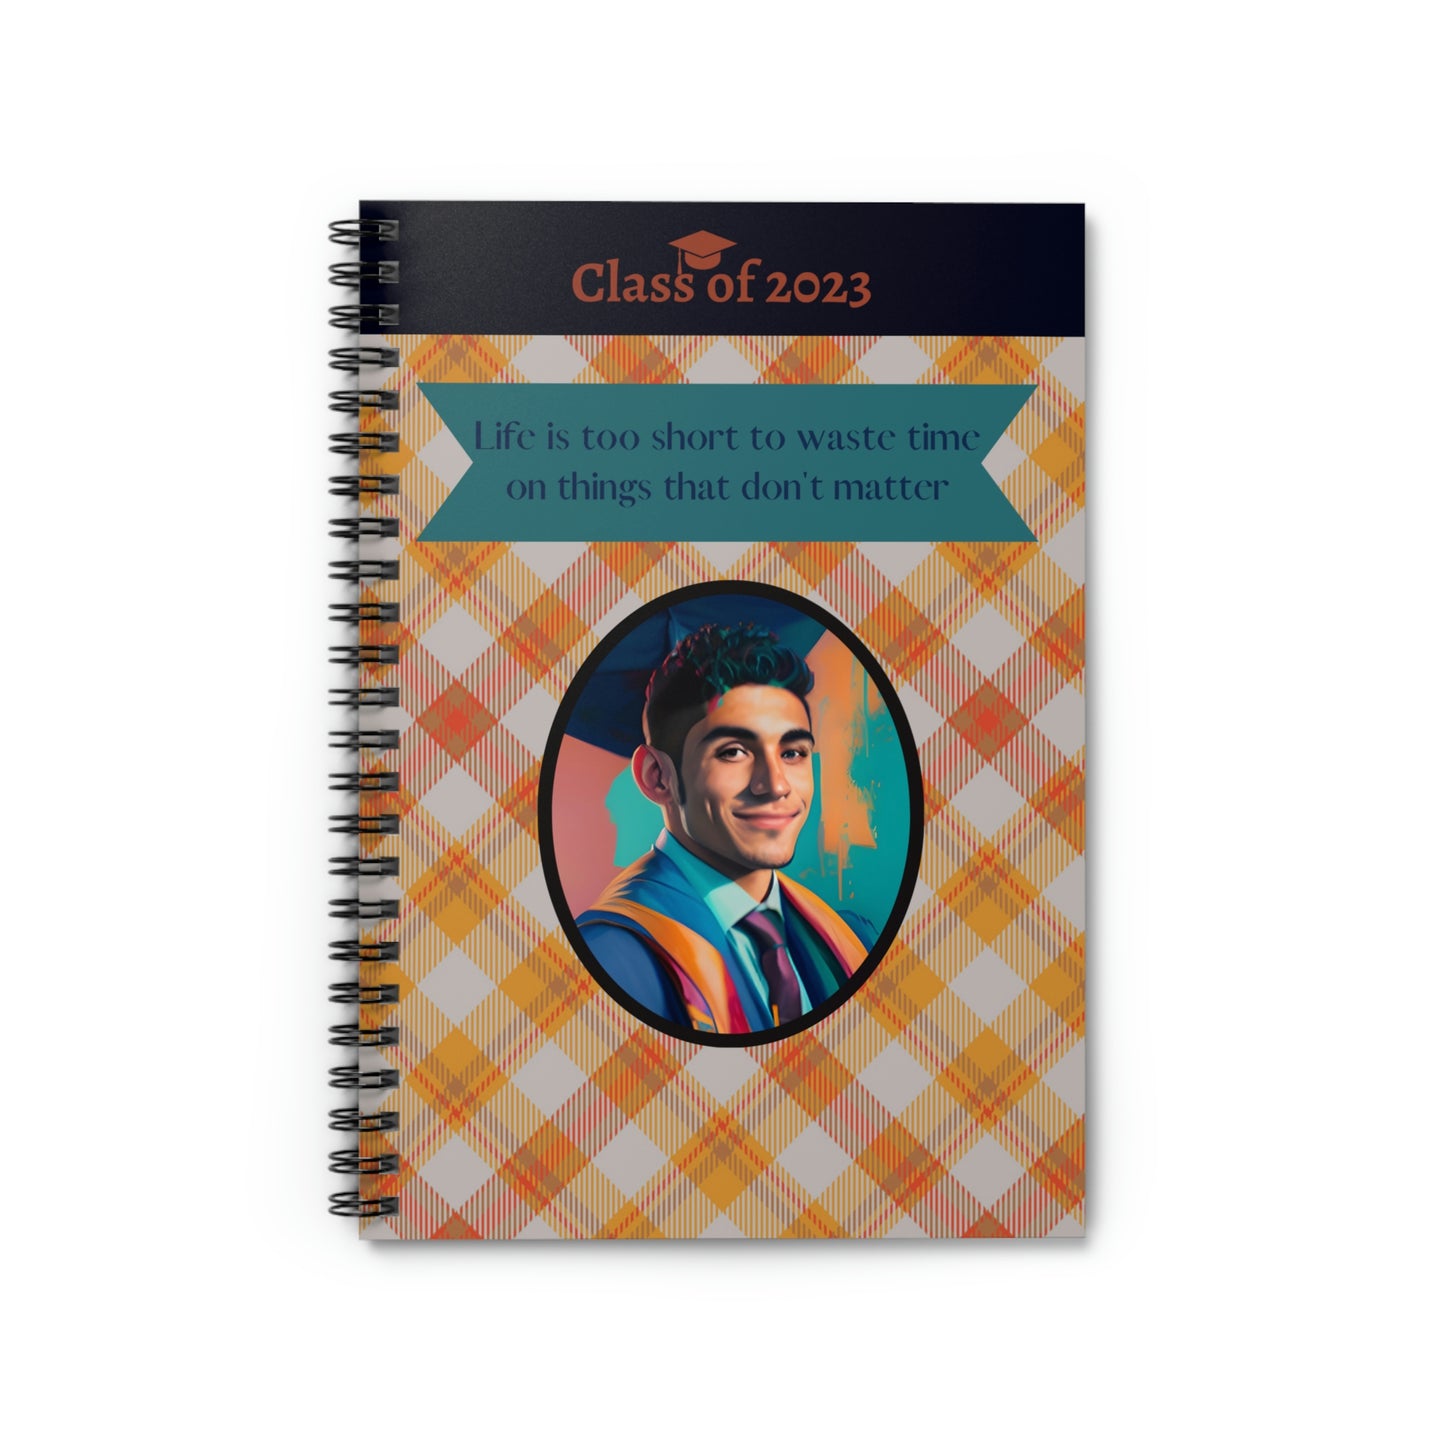 Class of 2023 Graduate Journal - (Latino Young Man 2) - Ruled Line